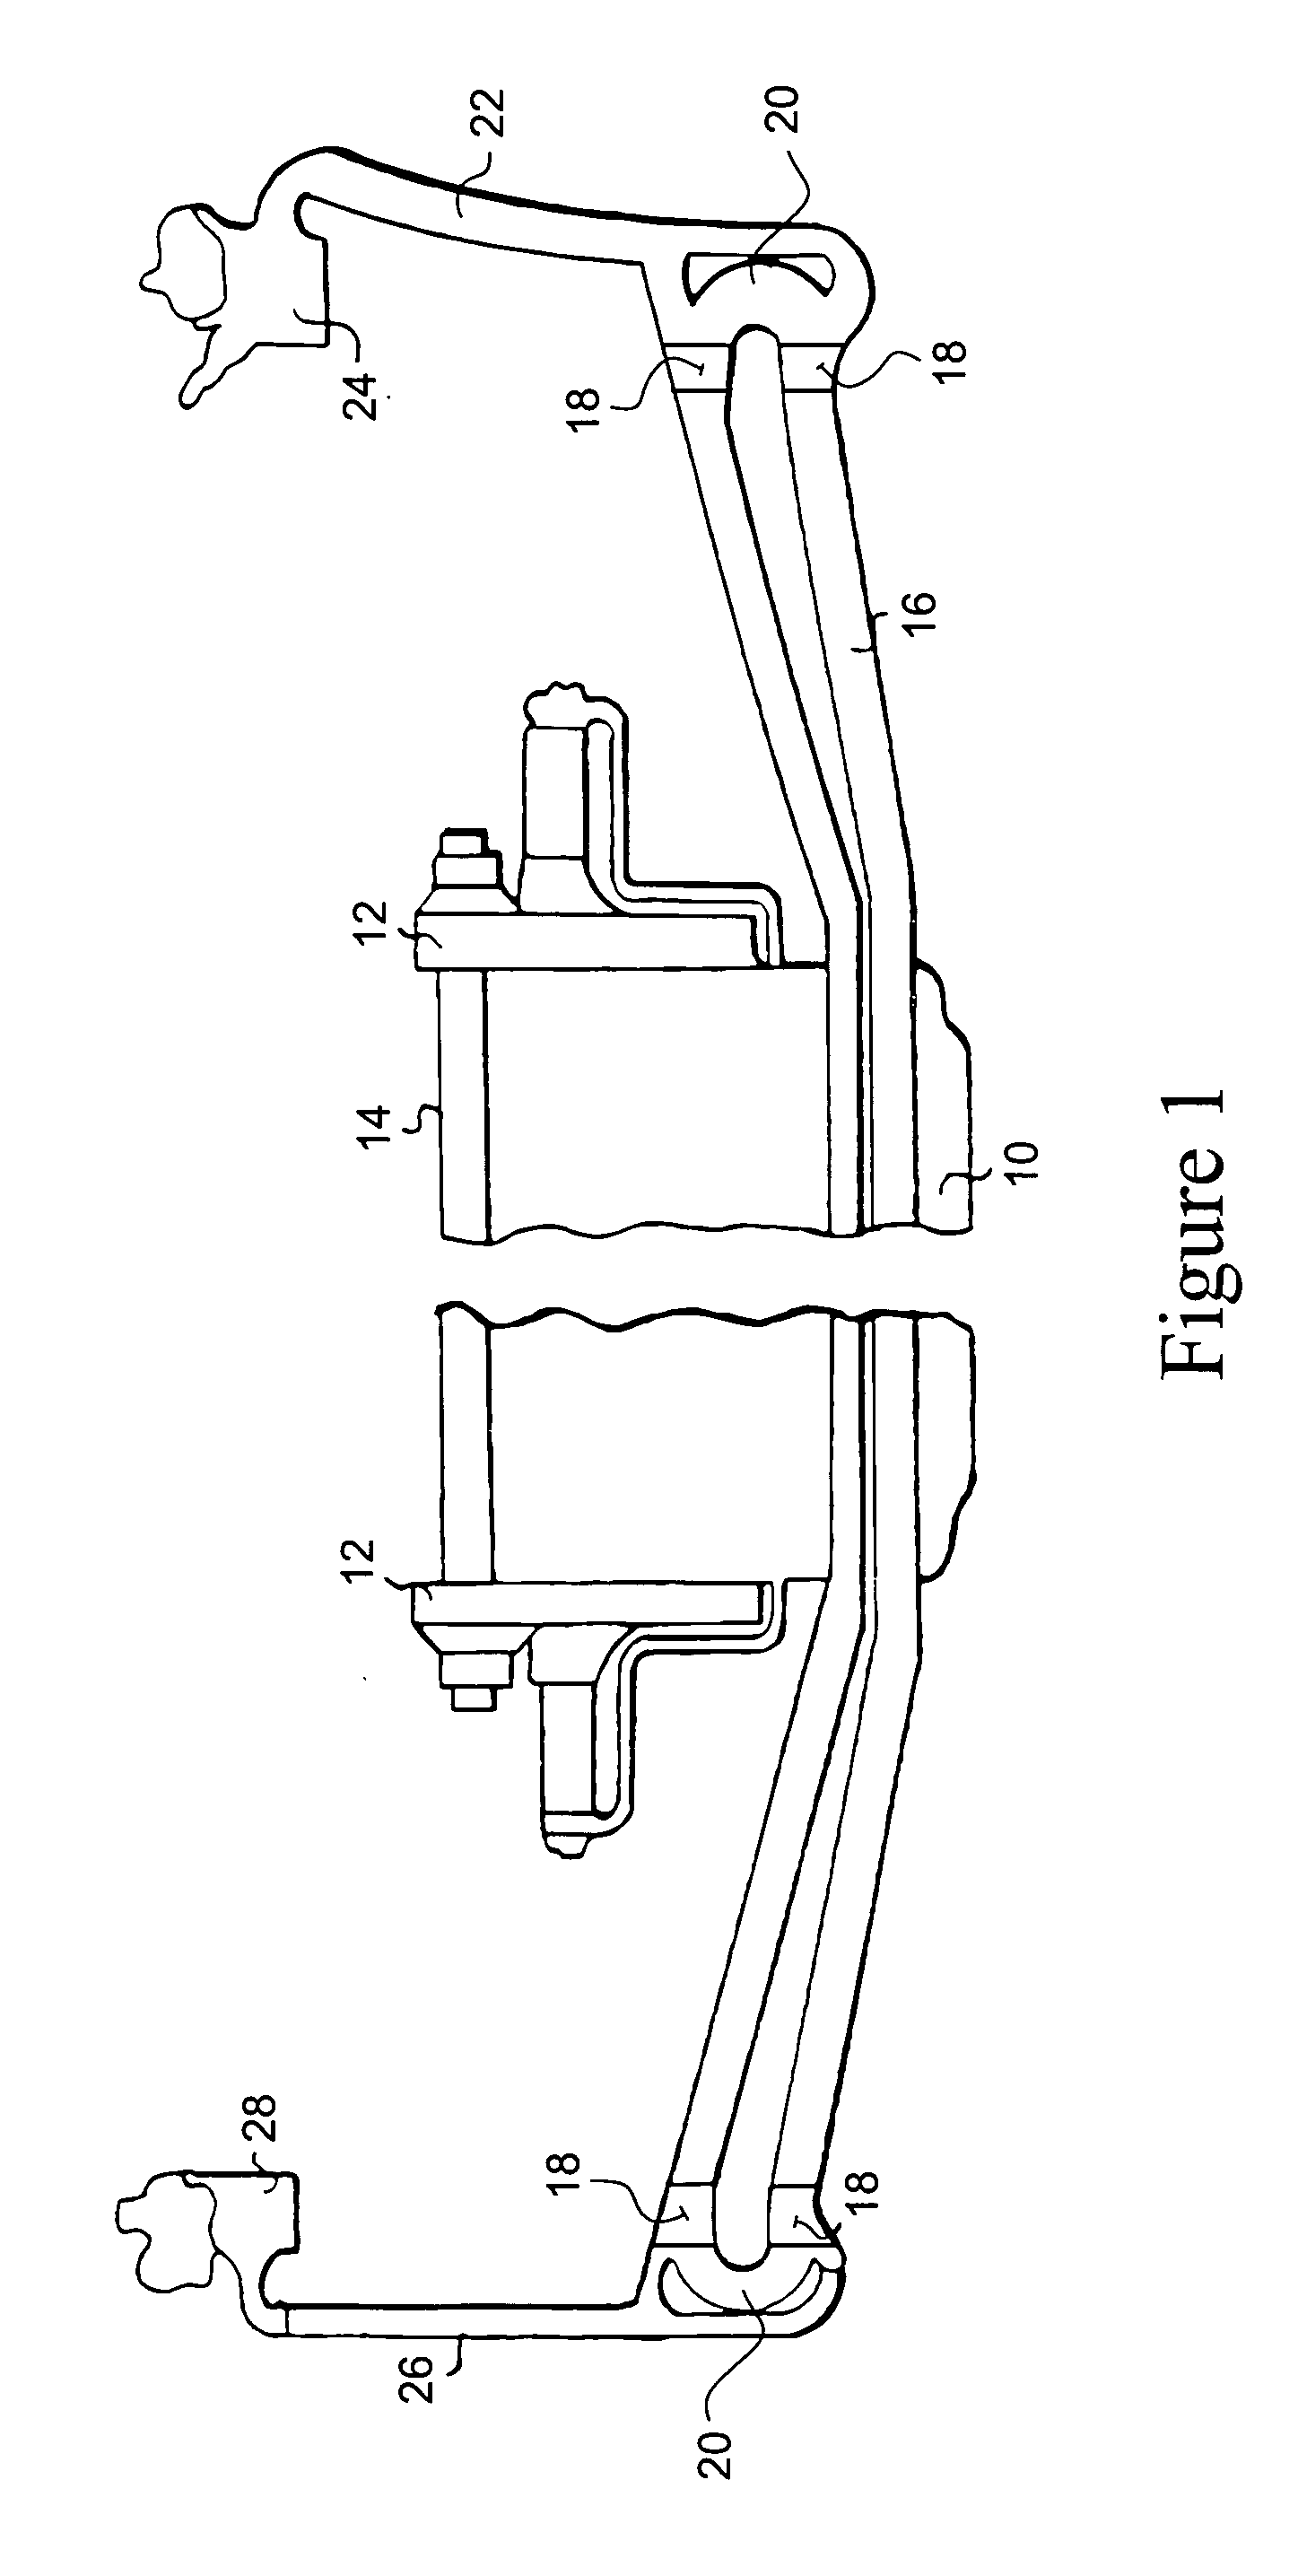 Method and system for applying an isolation layer to a brazed end of a generator armature winding bar